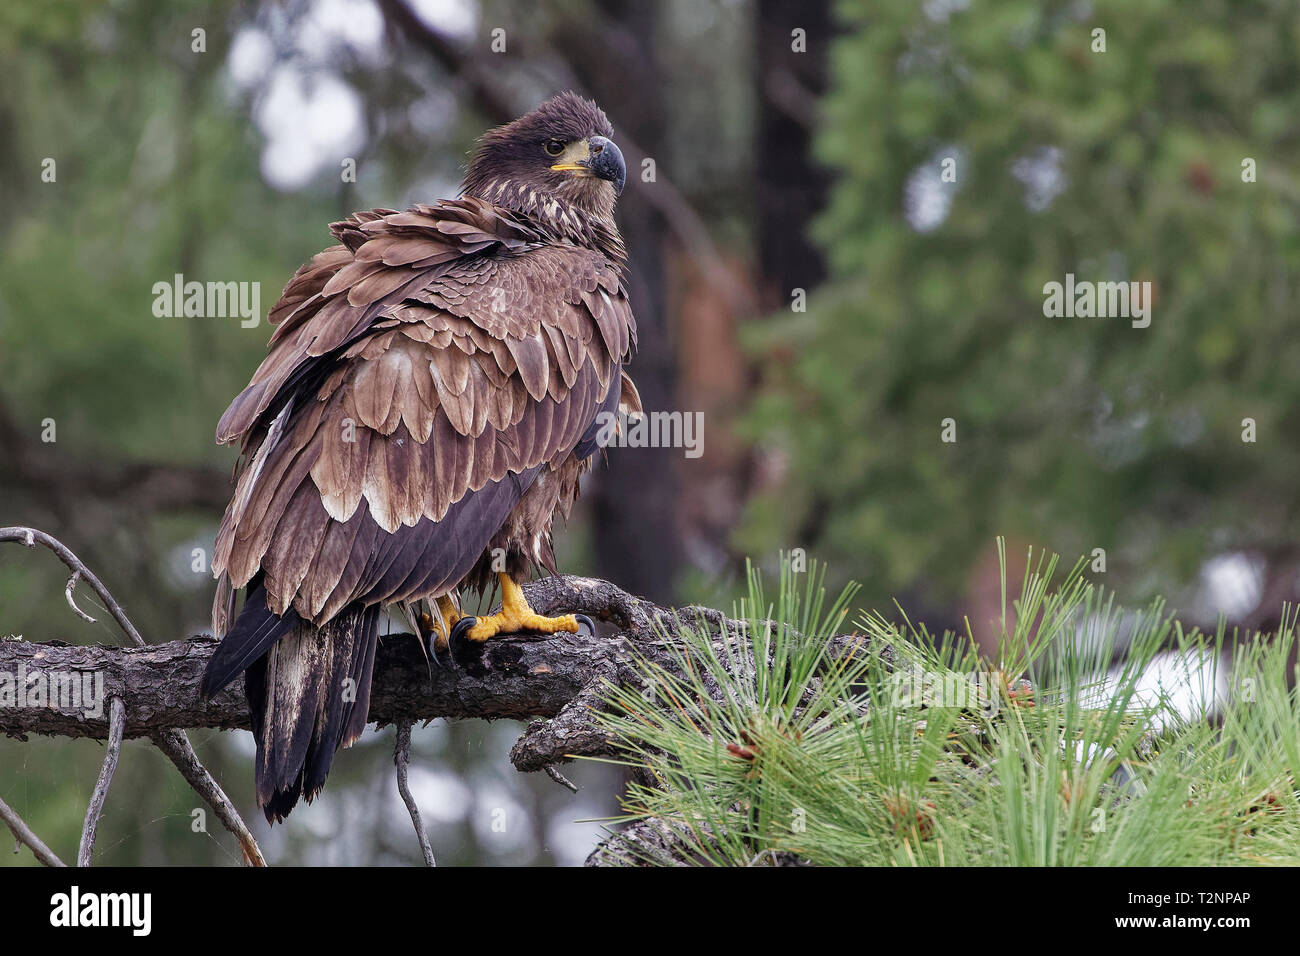 Juvenile bald eagle perched in forest next to Lake Coeur d'Alene, Idaho. Stock Photo